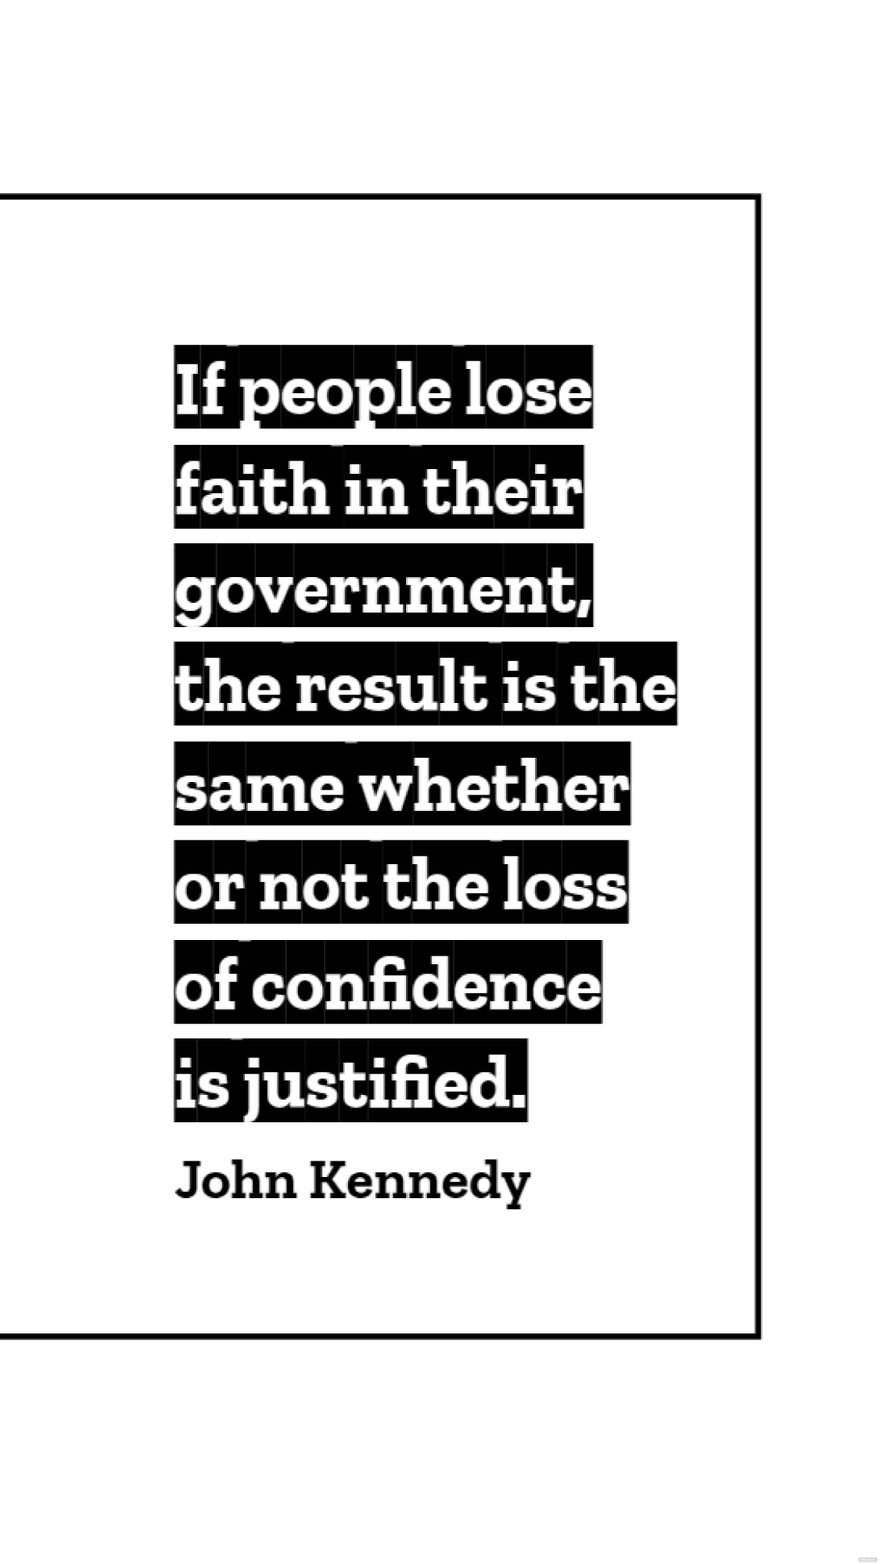 Free John Kennedy - If people lose faith in their government, the result is the same whether or not the loss of confidence is justified. in JPG